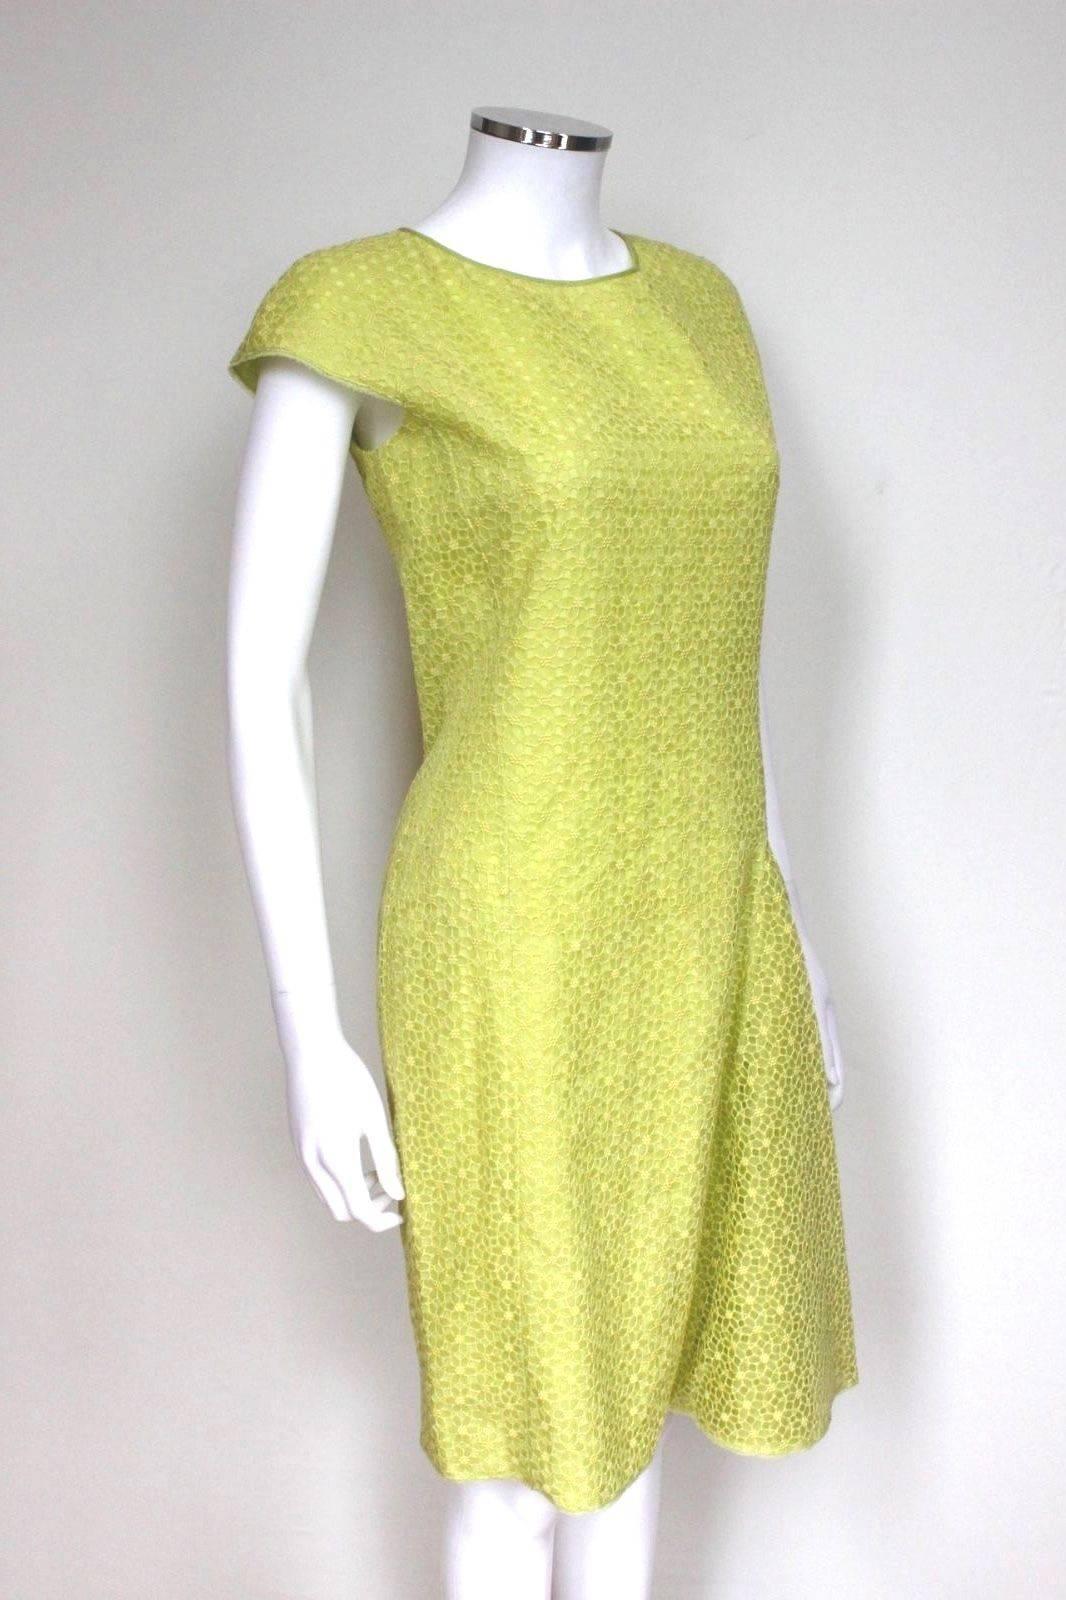 New Giambattista Valli Lime Lace Dress IT 40 UK 8
Bold and flirty lace dress, perfect for this summer 
Cap sleeve lace dress with crew neckline, flare hem to one side 
Concealed back zip closure.
Fully lined 
64%cotton 29% Silk 7% polyester
Length